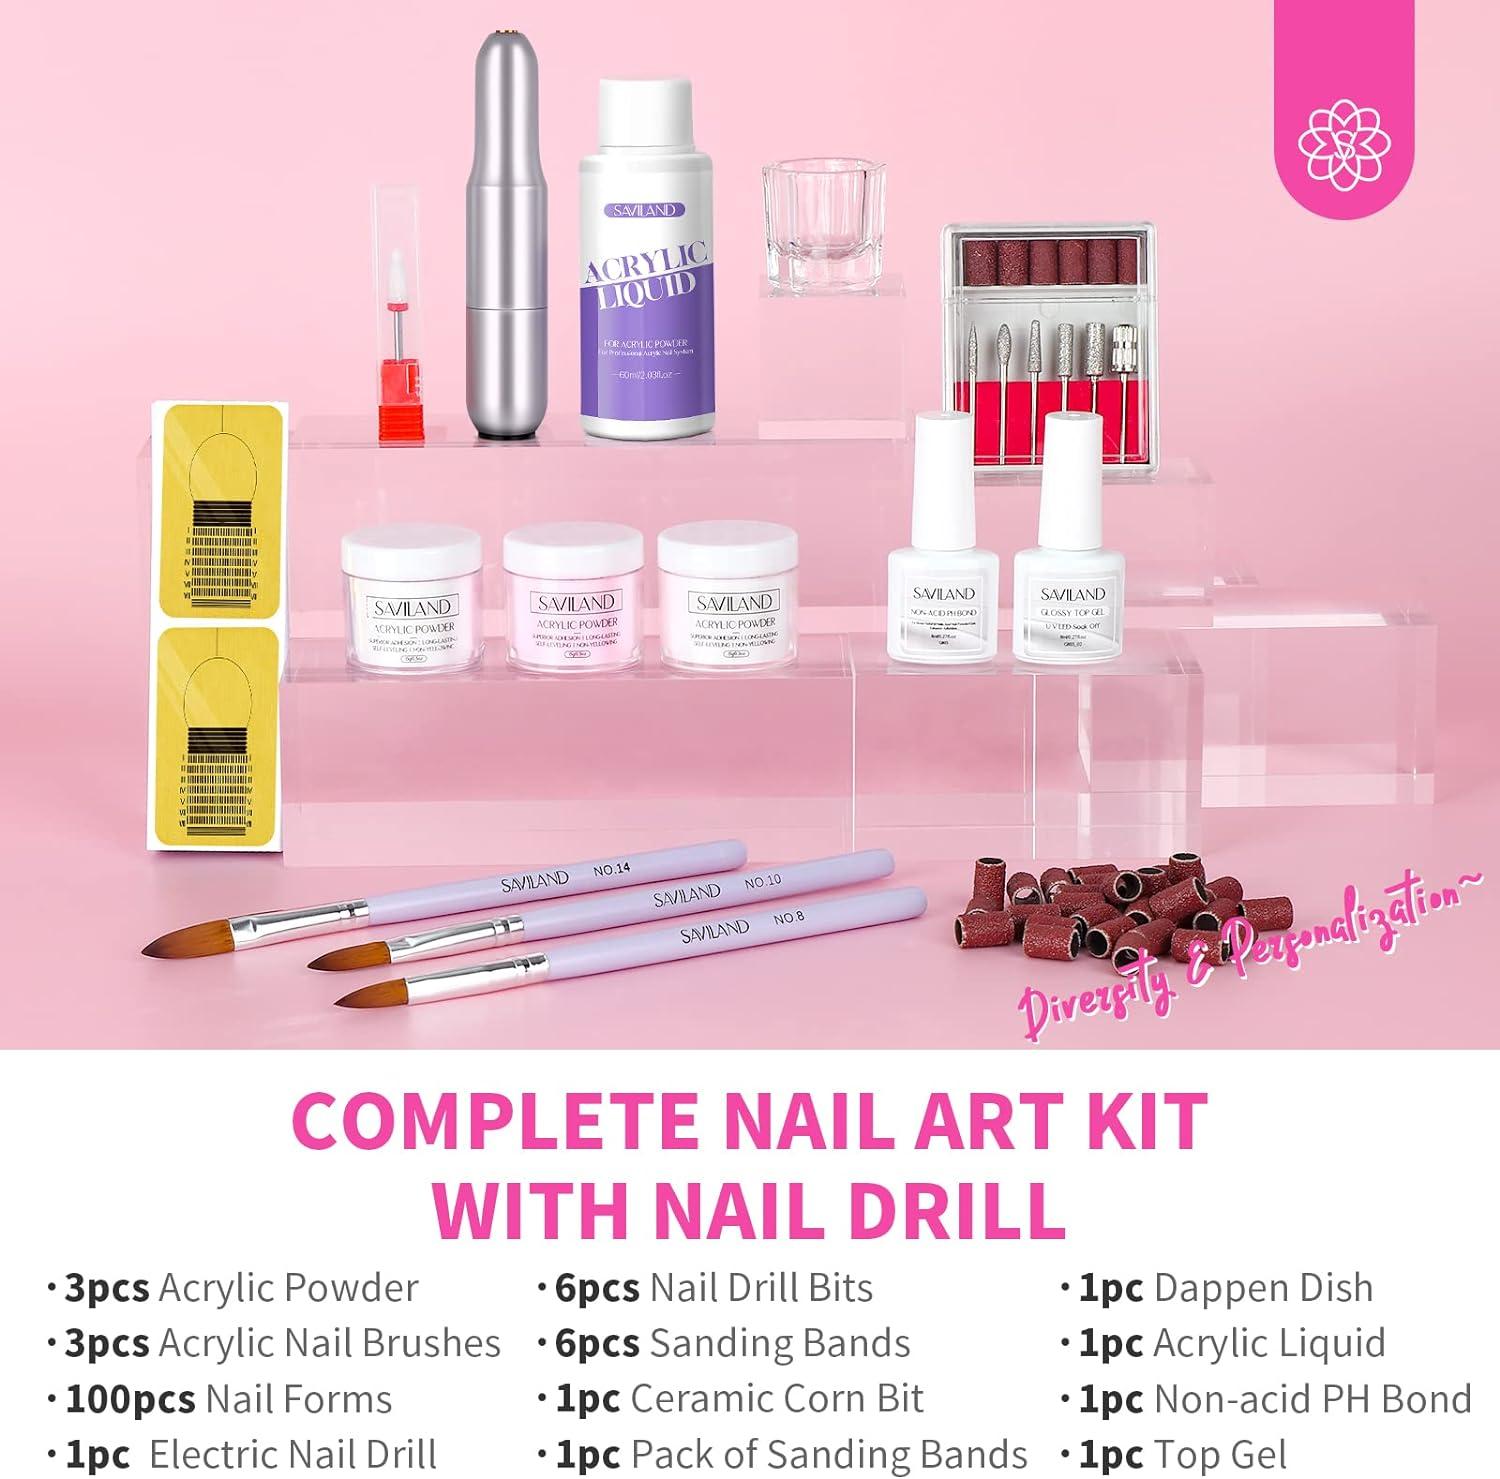 Complete Acrylic Nail Kit Beginners and Professionals Manicure Tool Sladies  DIY | eBay